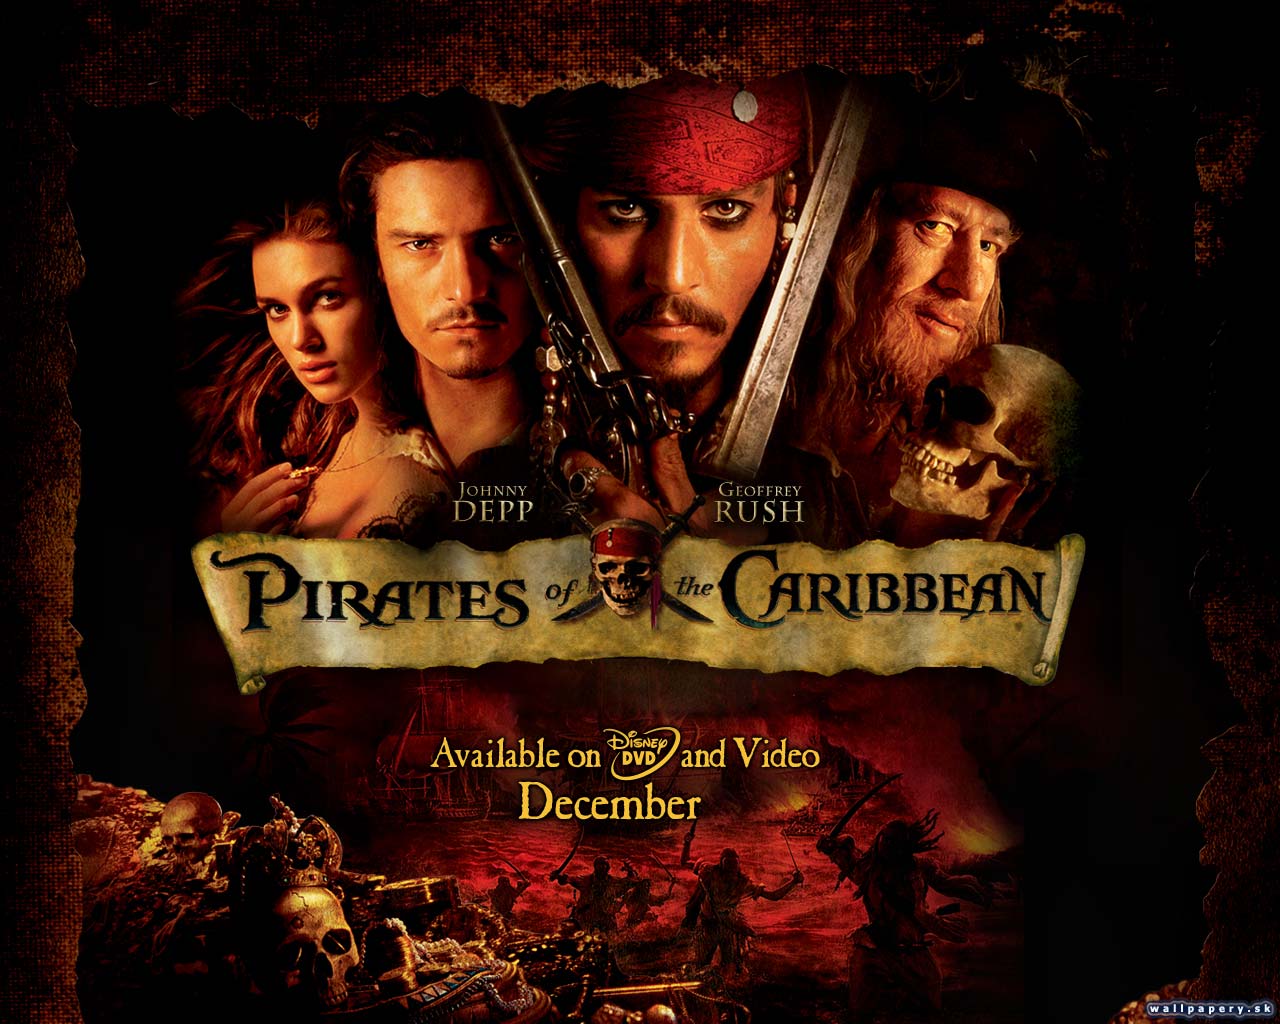 Pirates of the Caribbean - wallpaper 6